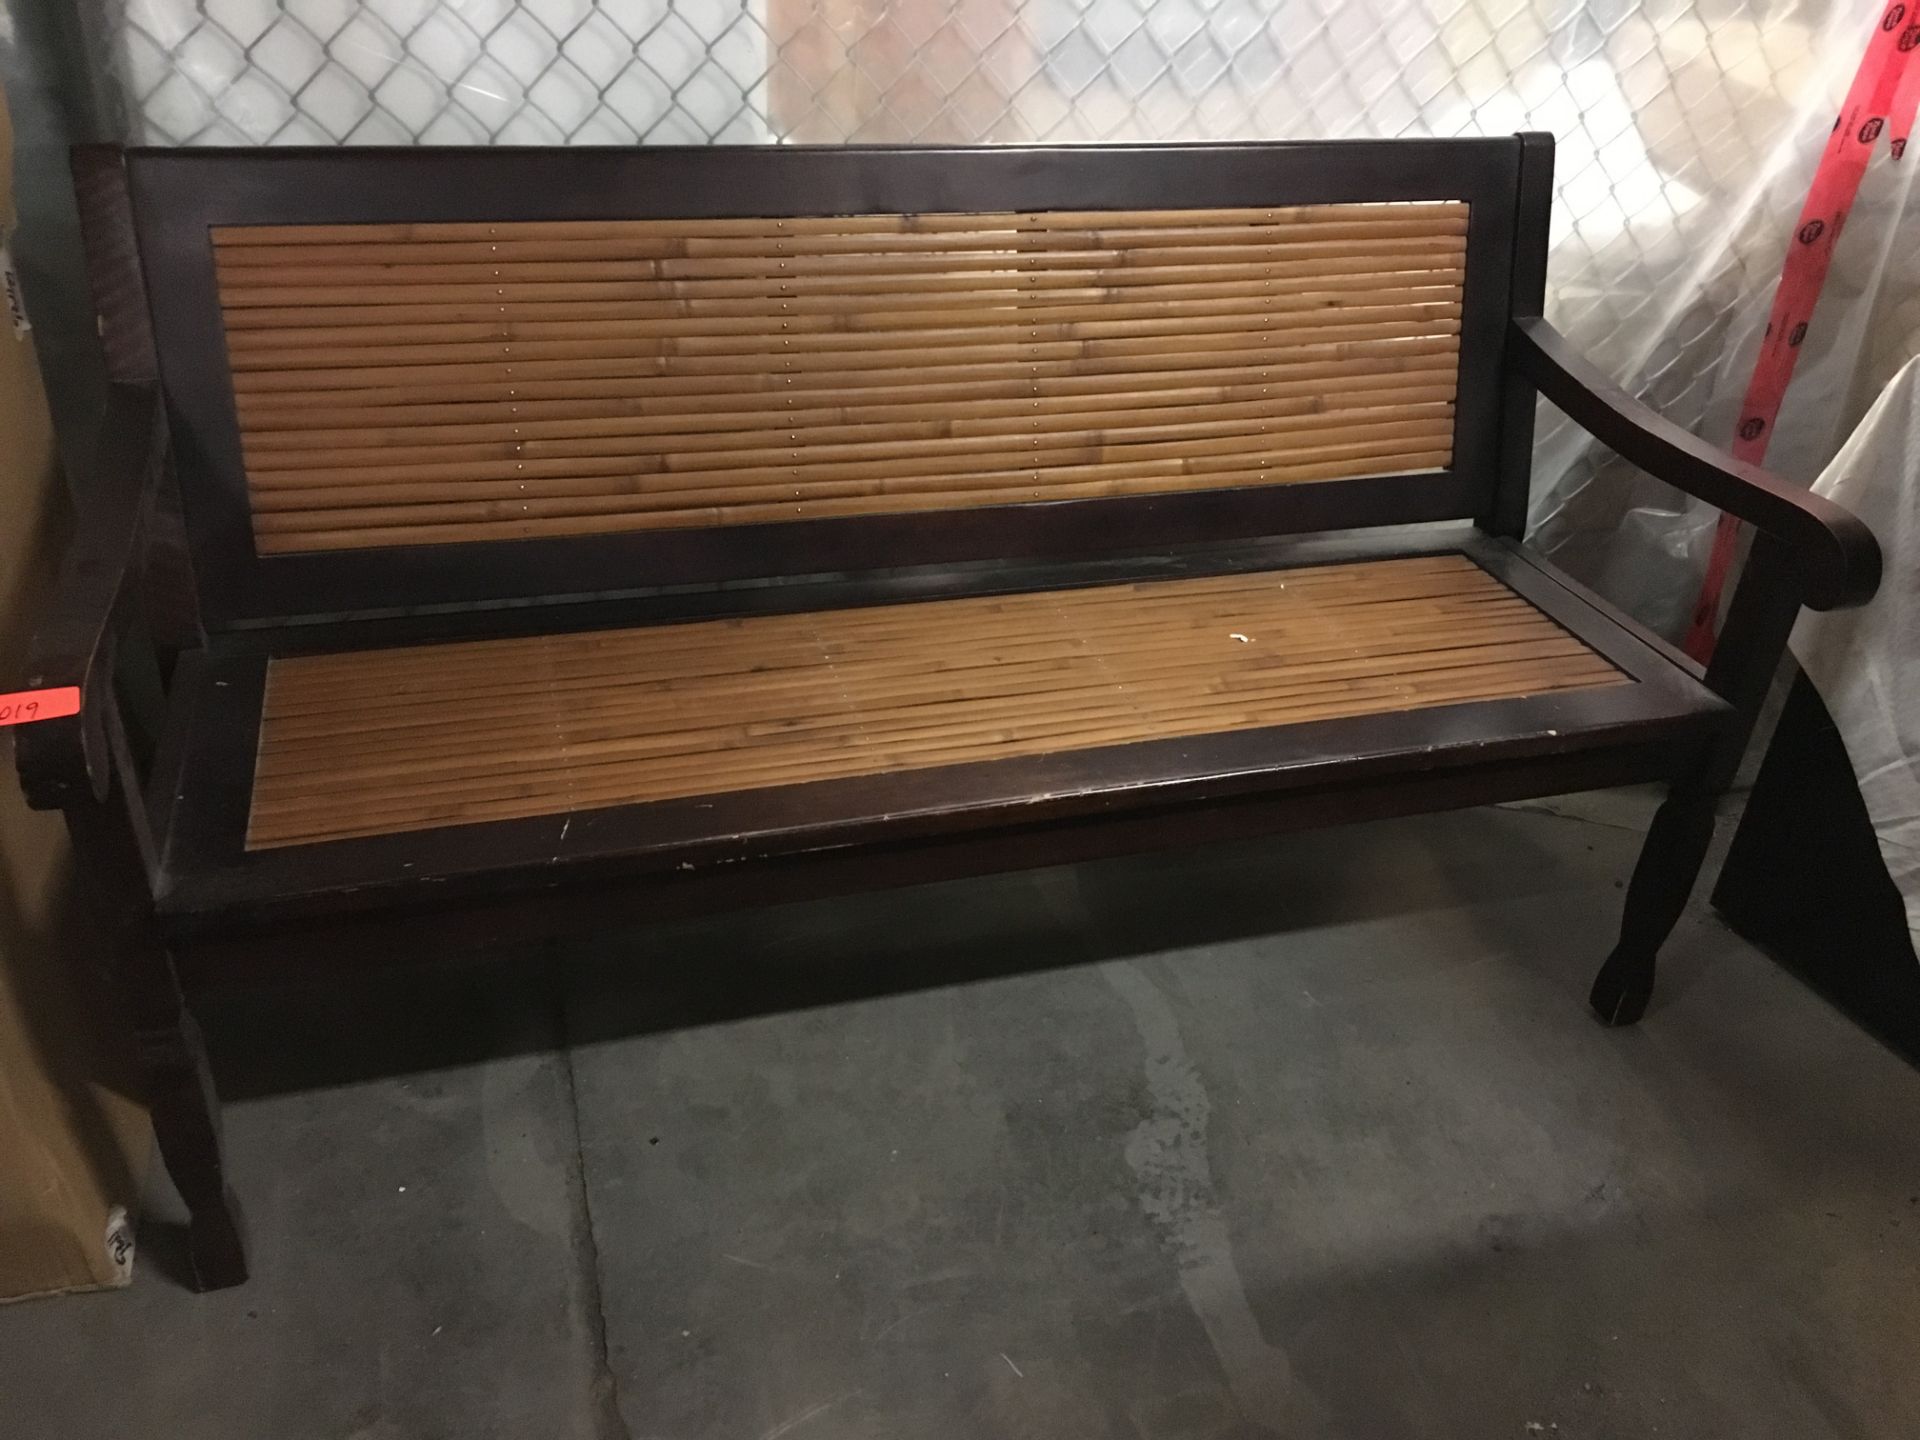 Bamboo Sytle Waiting Bench - 62"